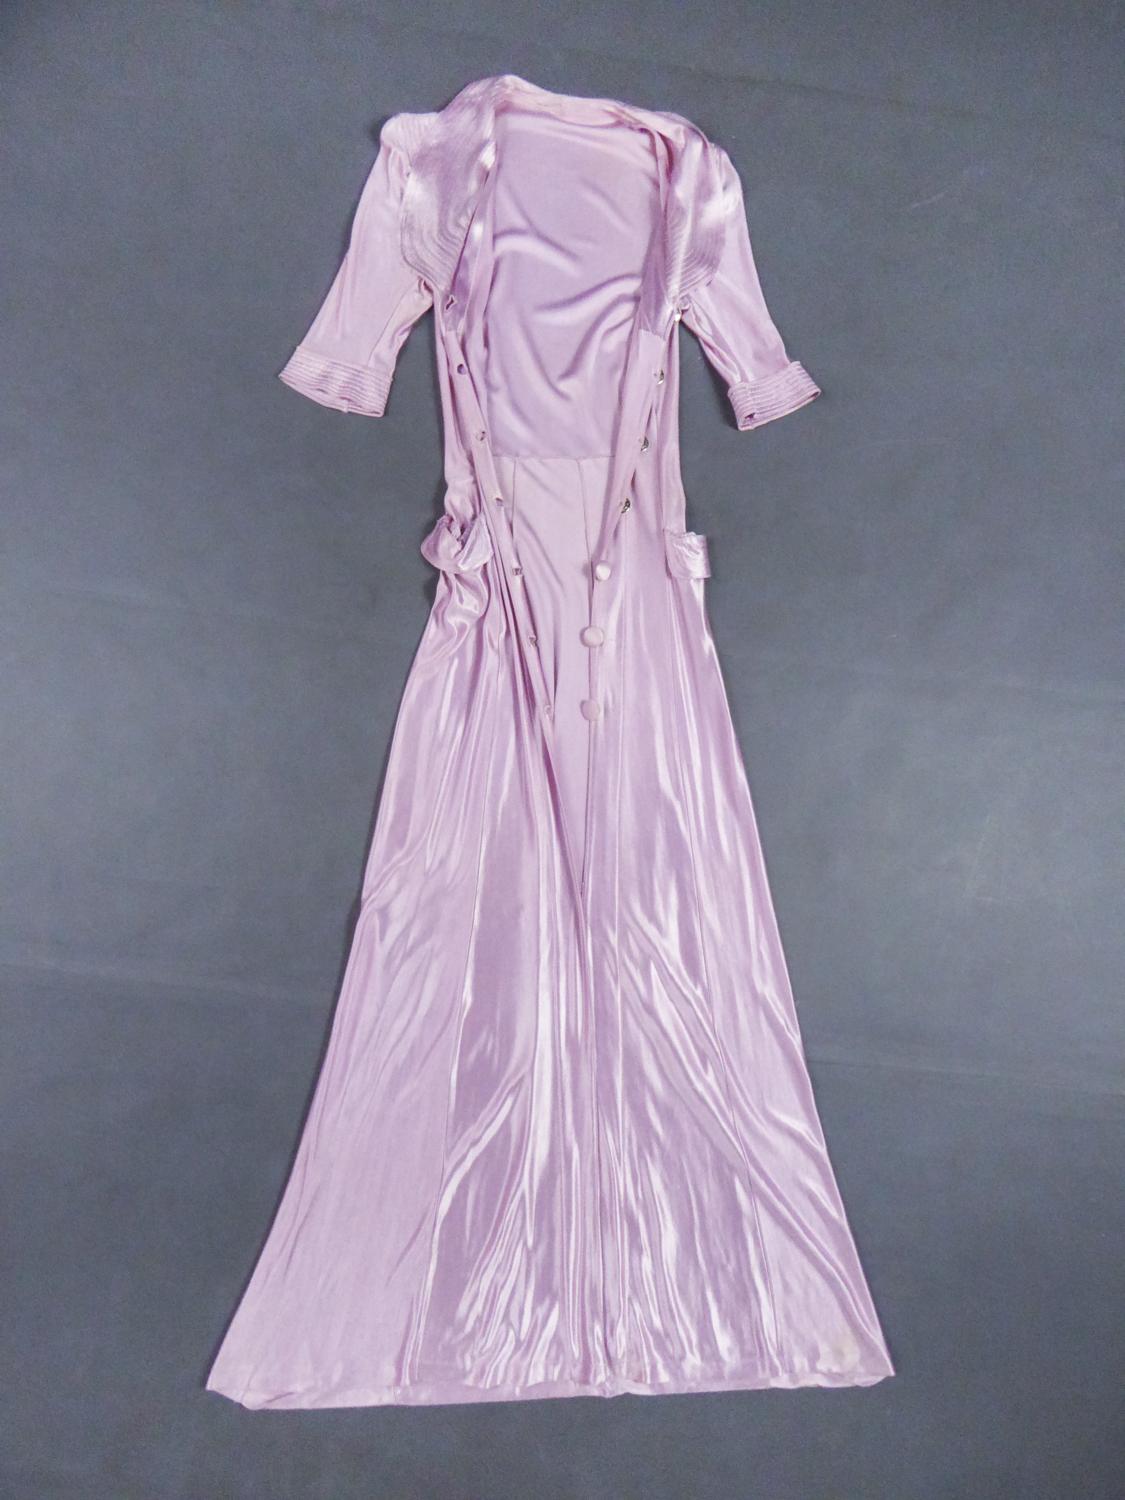 Circa 1935/1940
France

Astonishing indoor or evening coat dress in pink purple and yellow gold synthetic fibranne from the 1940s. Heavy and very fine fabric with an excellent 